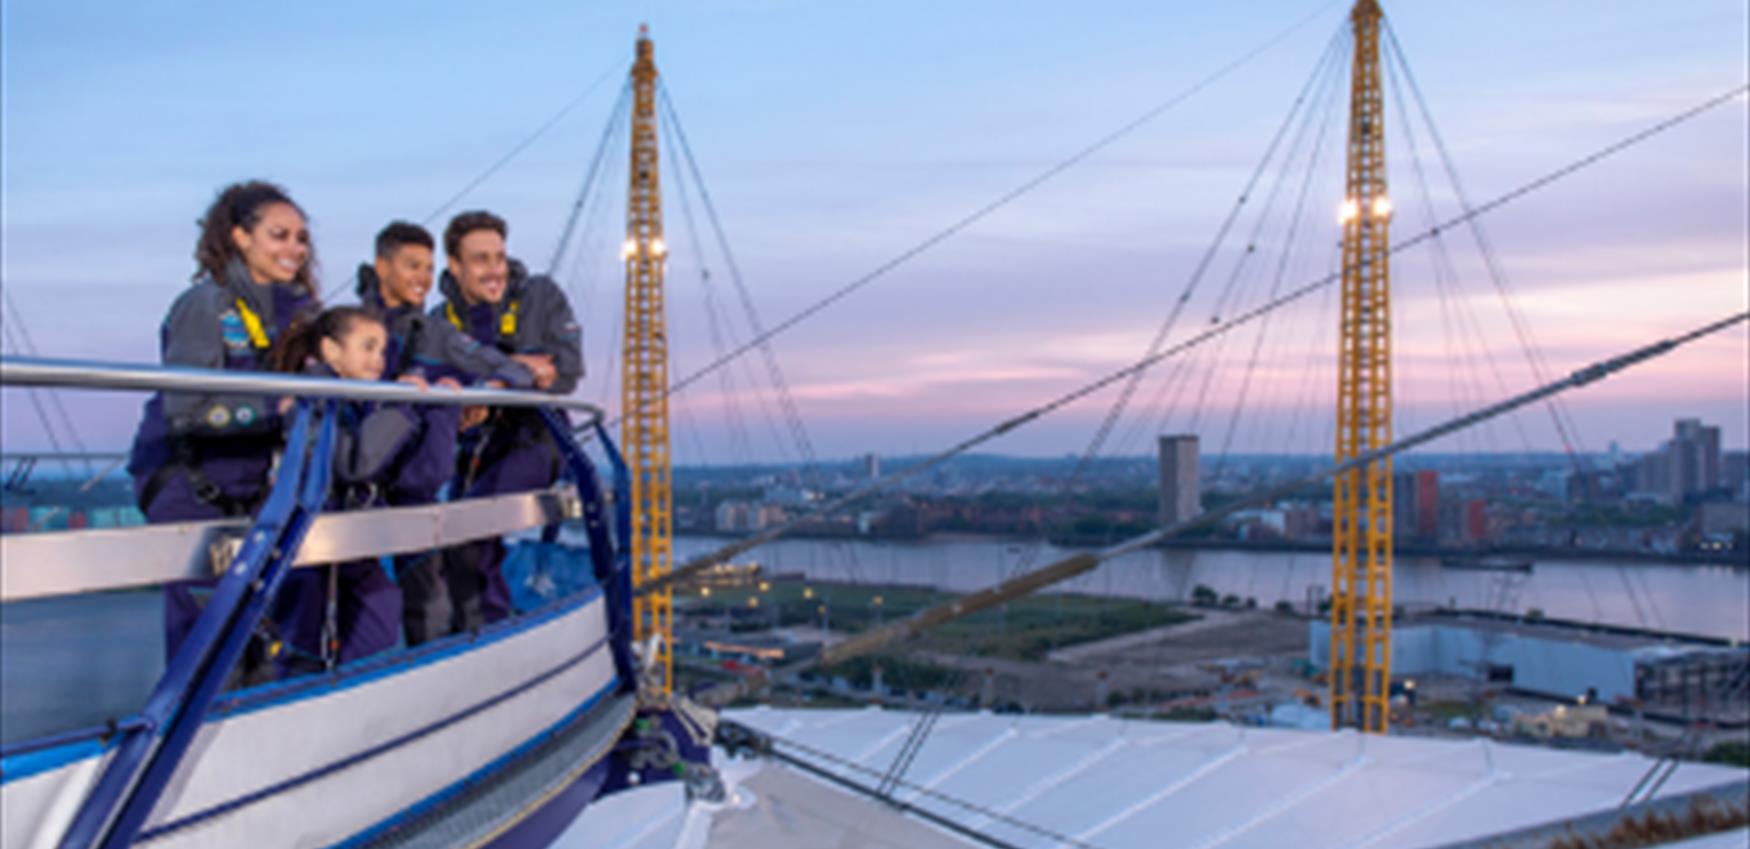 A family enjoy the view from Up at The O2 at sunset.